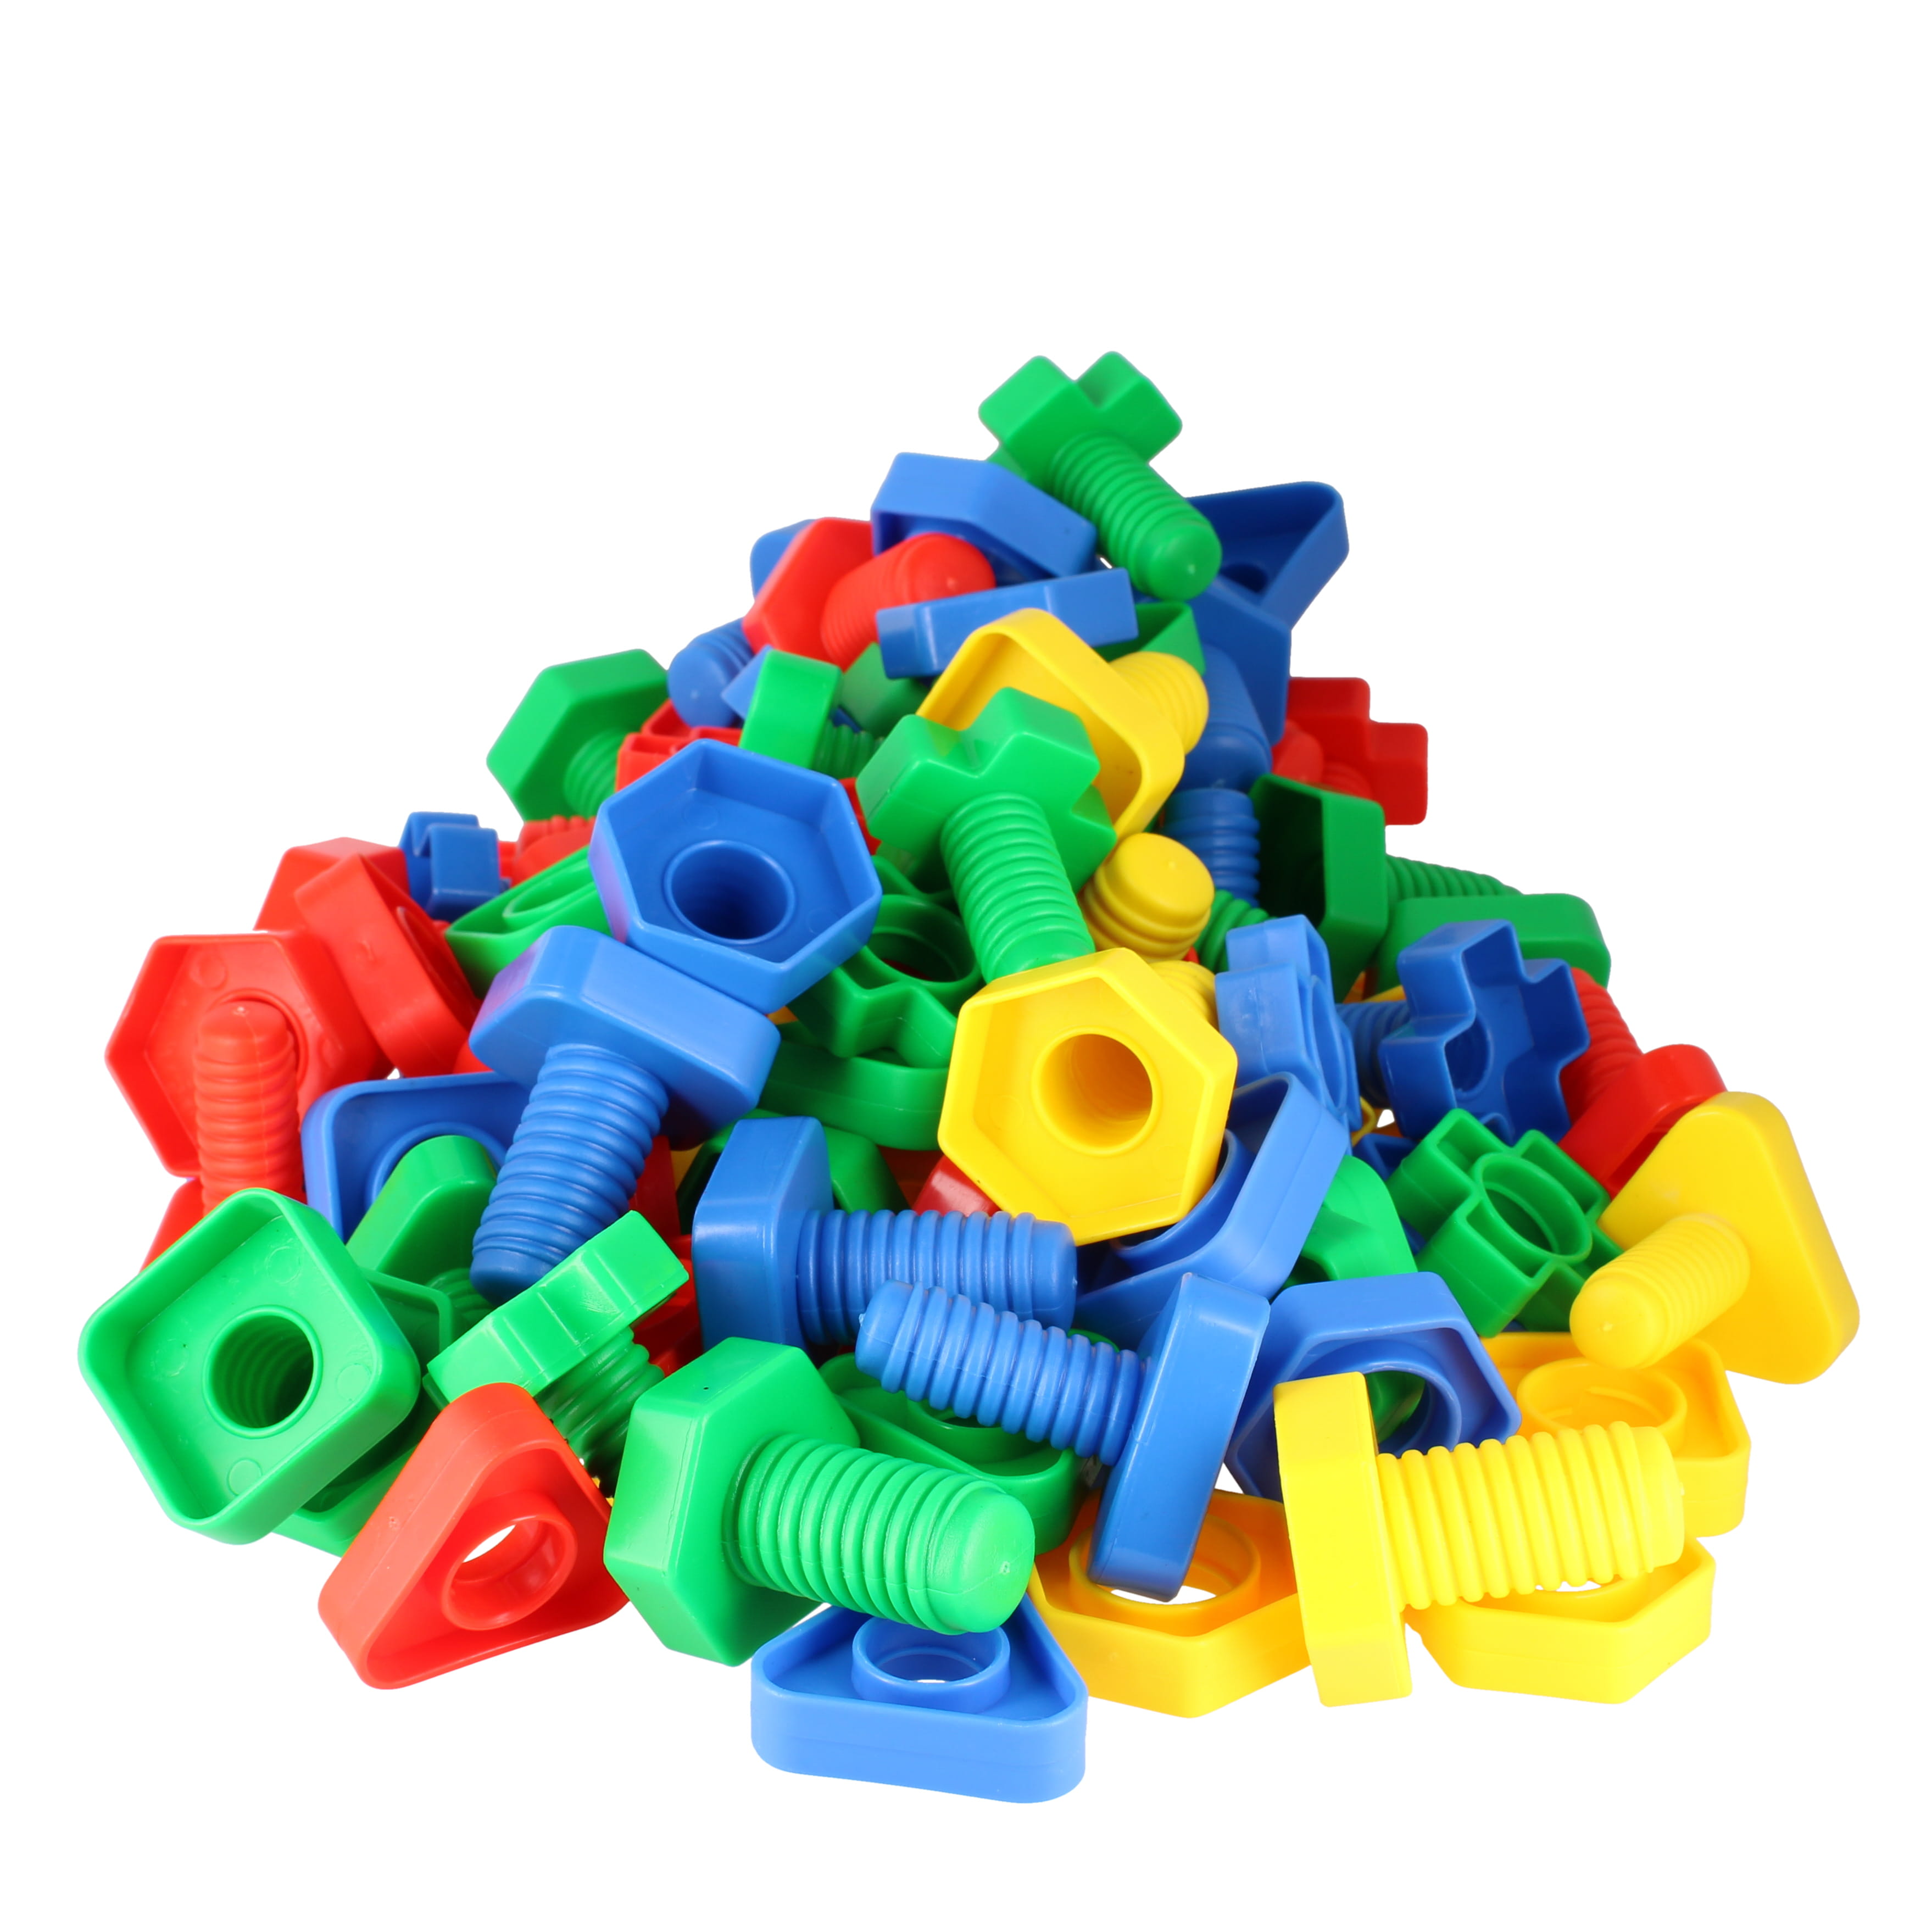 Nuts & Bolts Assorted - pack of 96